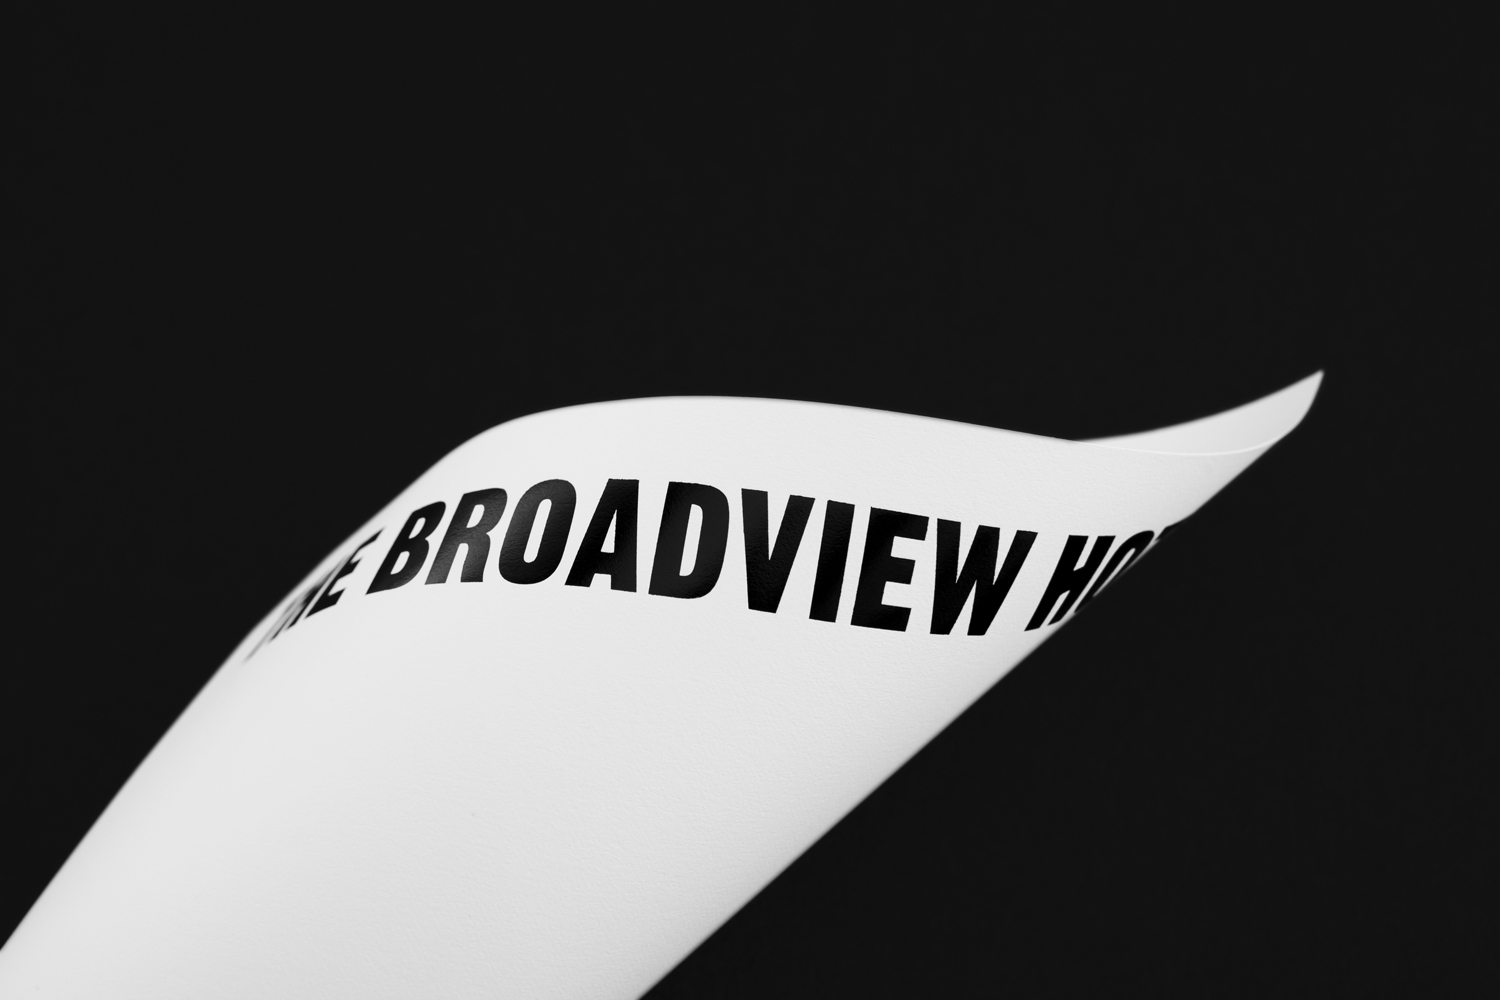 Visual identity and print designed by Blok for Toronto's The Broadview Hotel